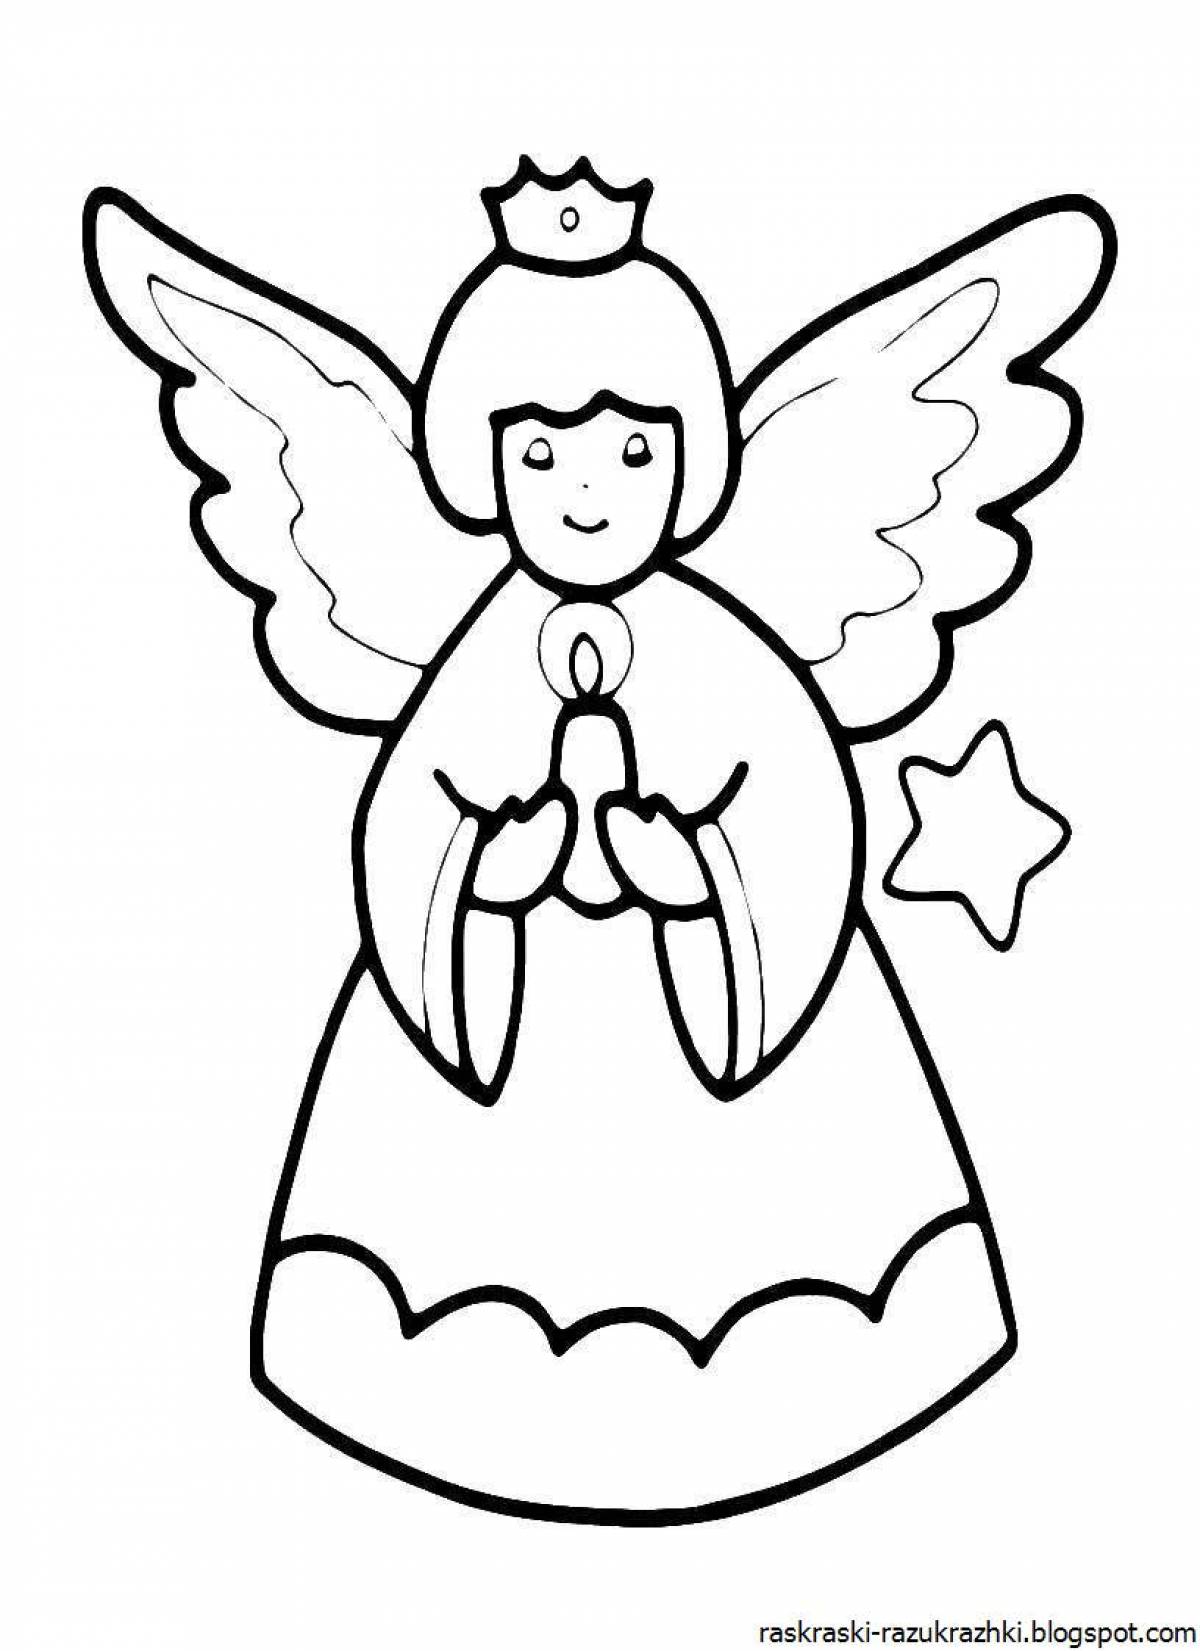 Exalted Christmas angel coloring page